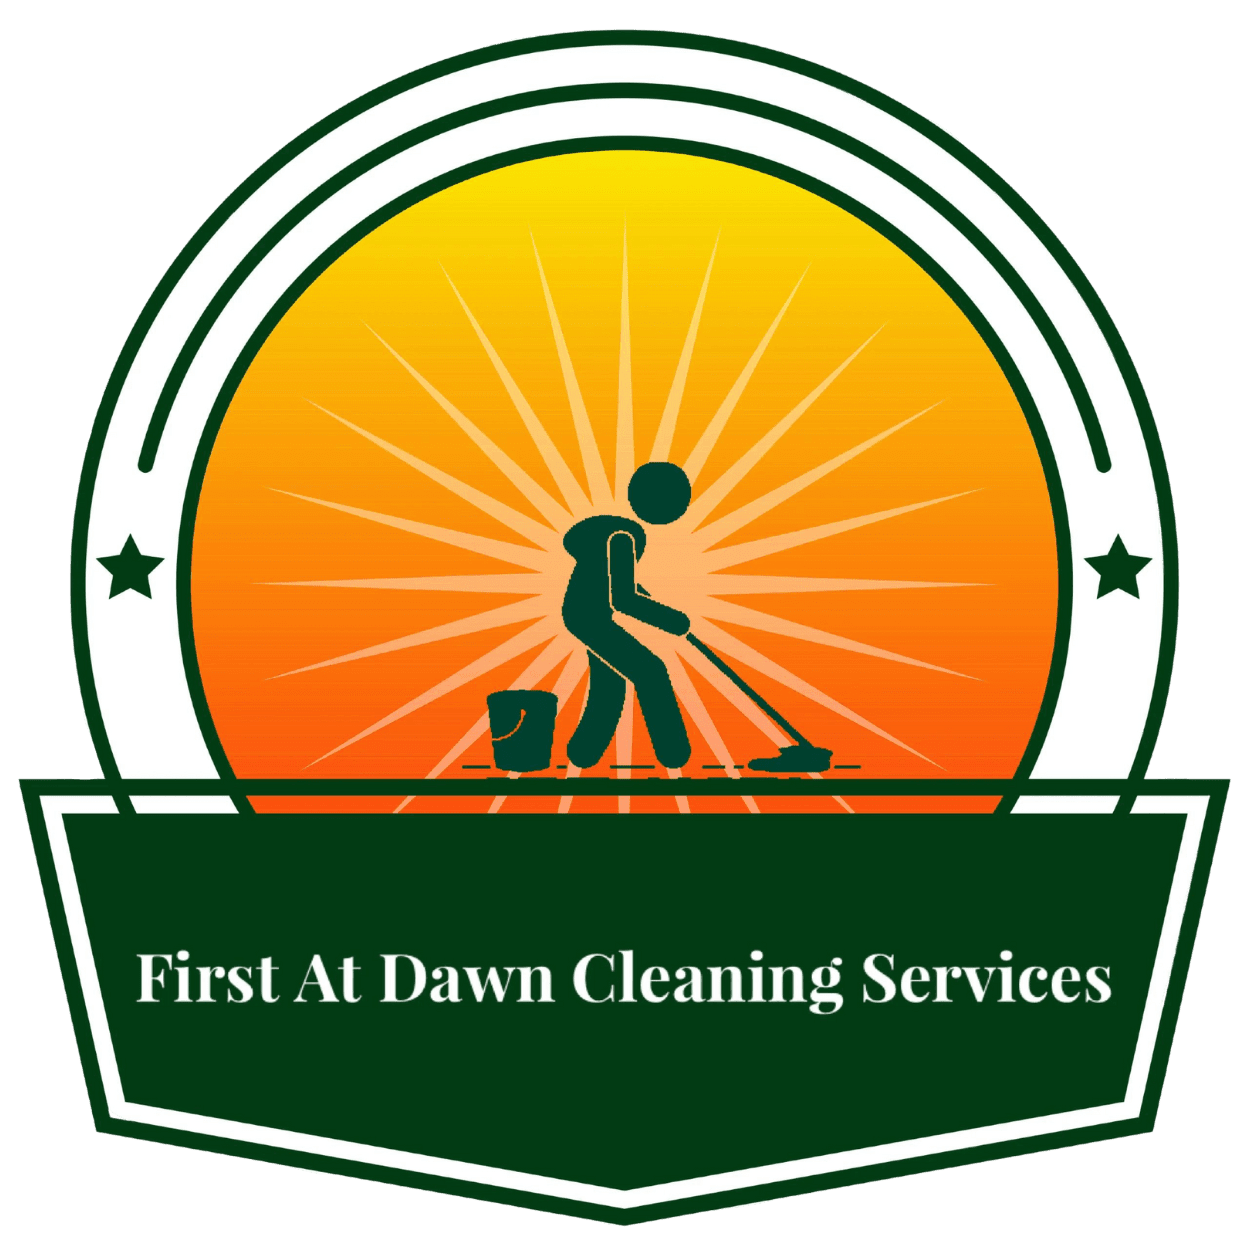 First At Dawn Cleaning Services